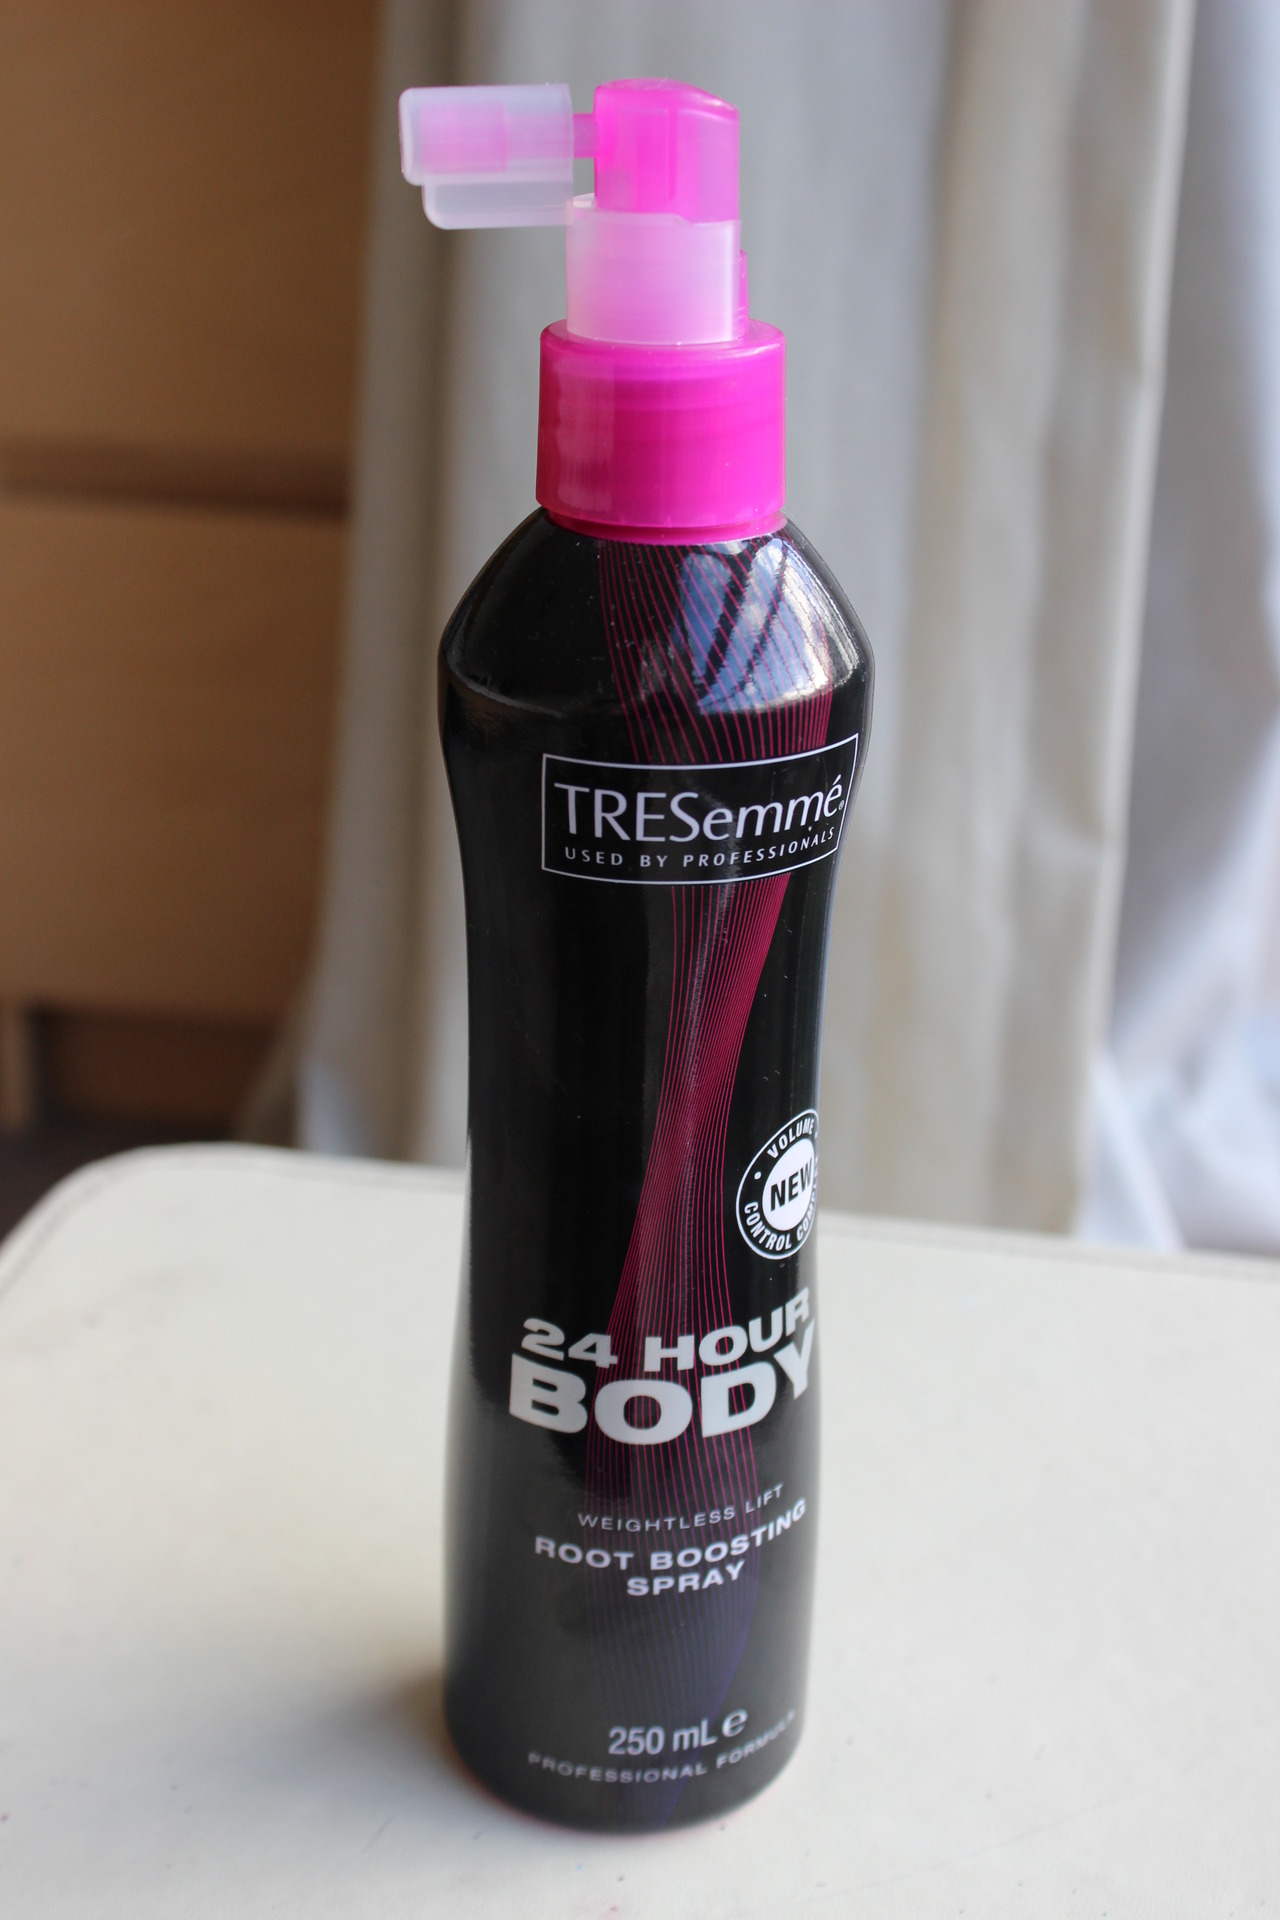 Tresemme 24 Hour Root Boosting Spray